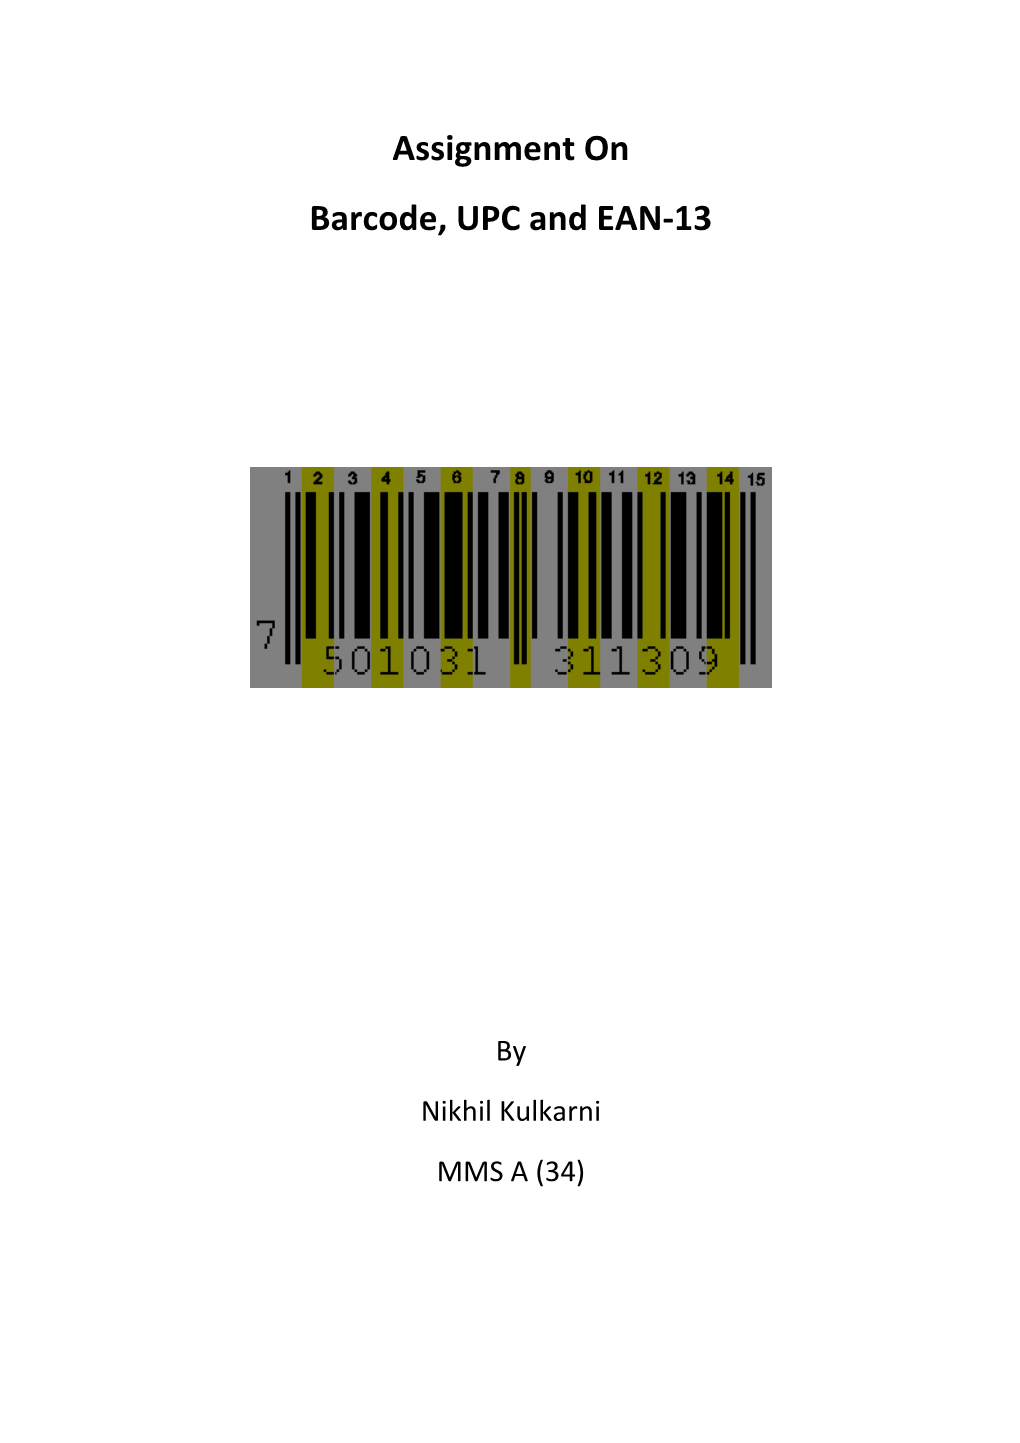 Barcode, UPC and EAN-13